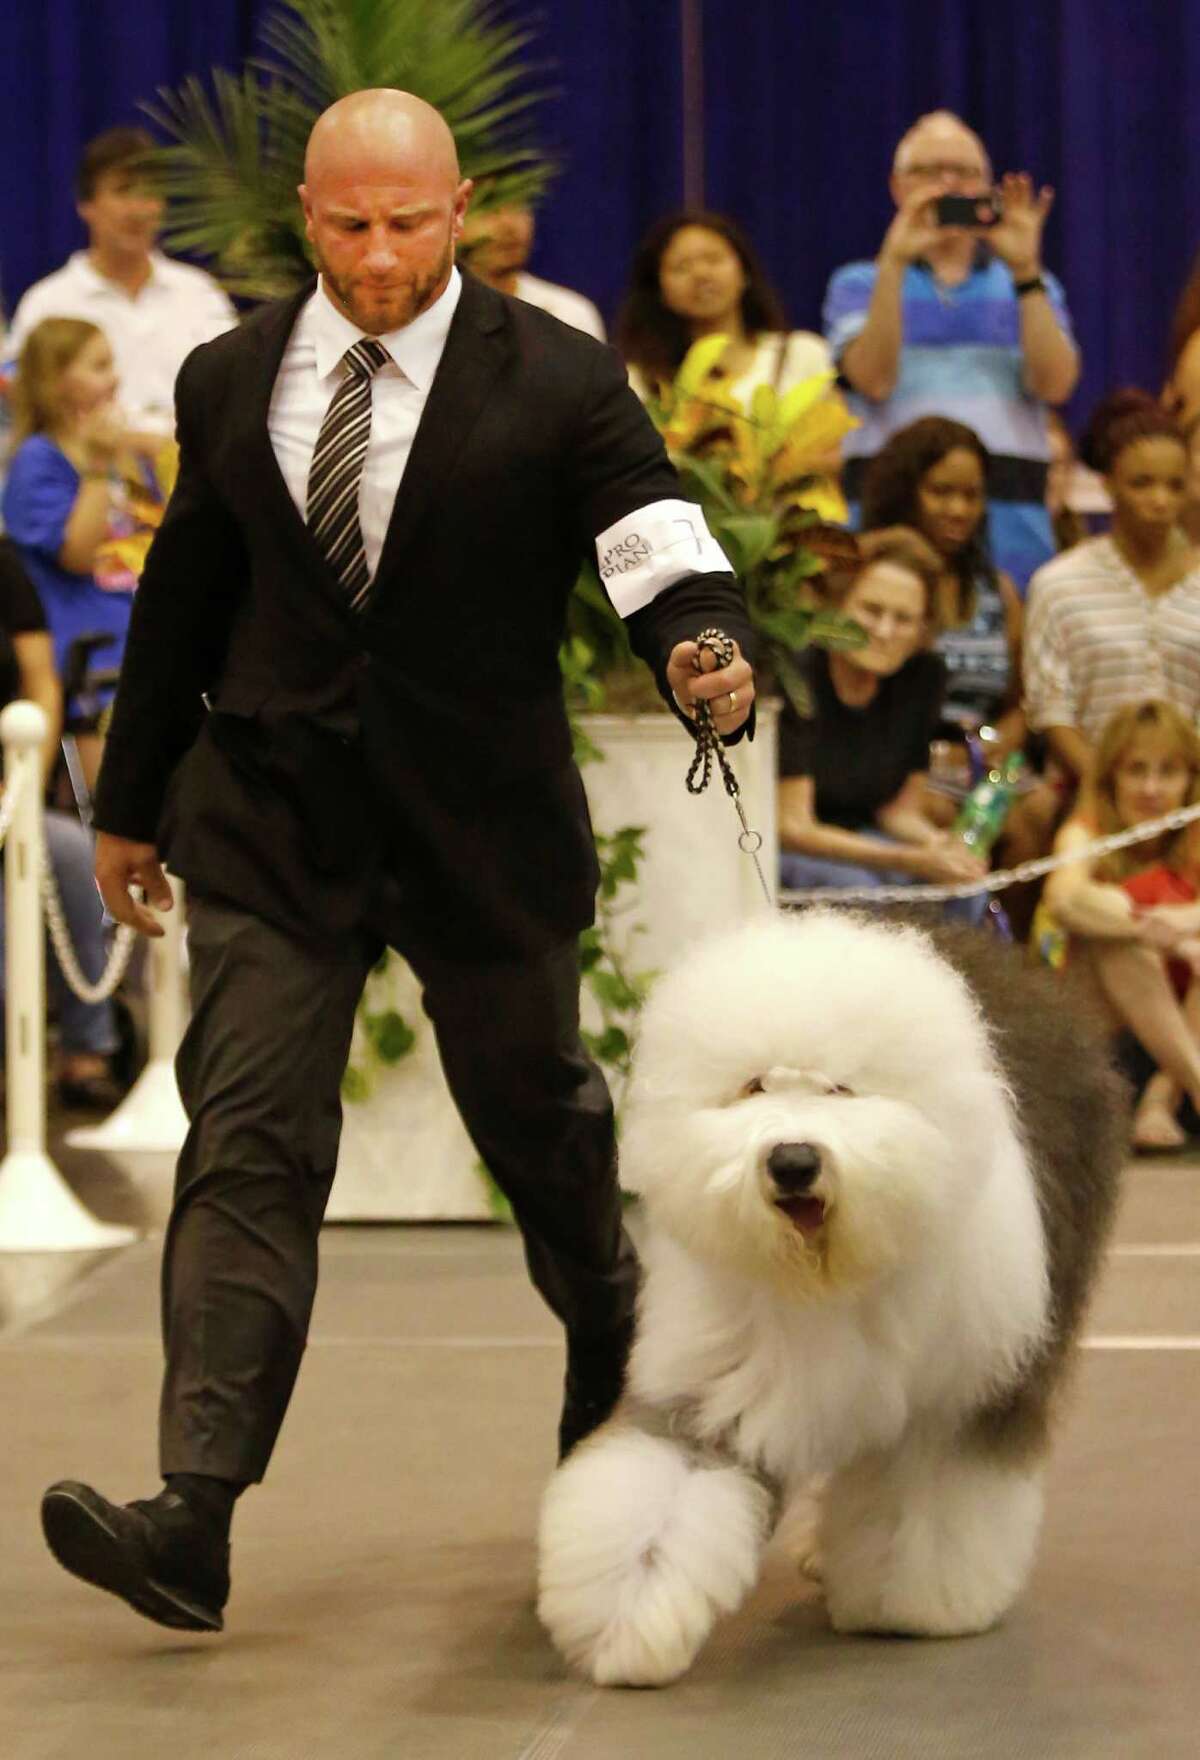 Colton Johnson of Colorado Springs, CO competes with an Old English Sheepdog named Swagger during the Best of Show competition at the Houston World Series of Dog Shows at NRG Center Sunday, July 20, 2014, in Houston. He won Best of Show for Sunday's show and Best of the Best for the overall shows.